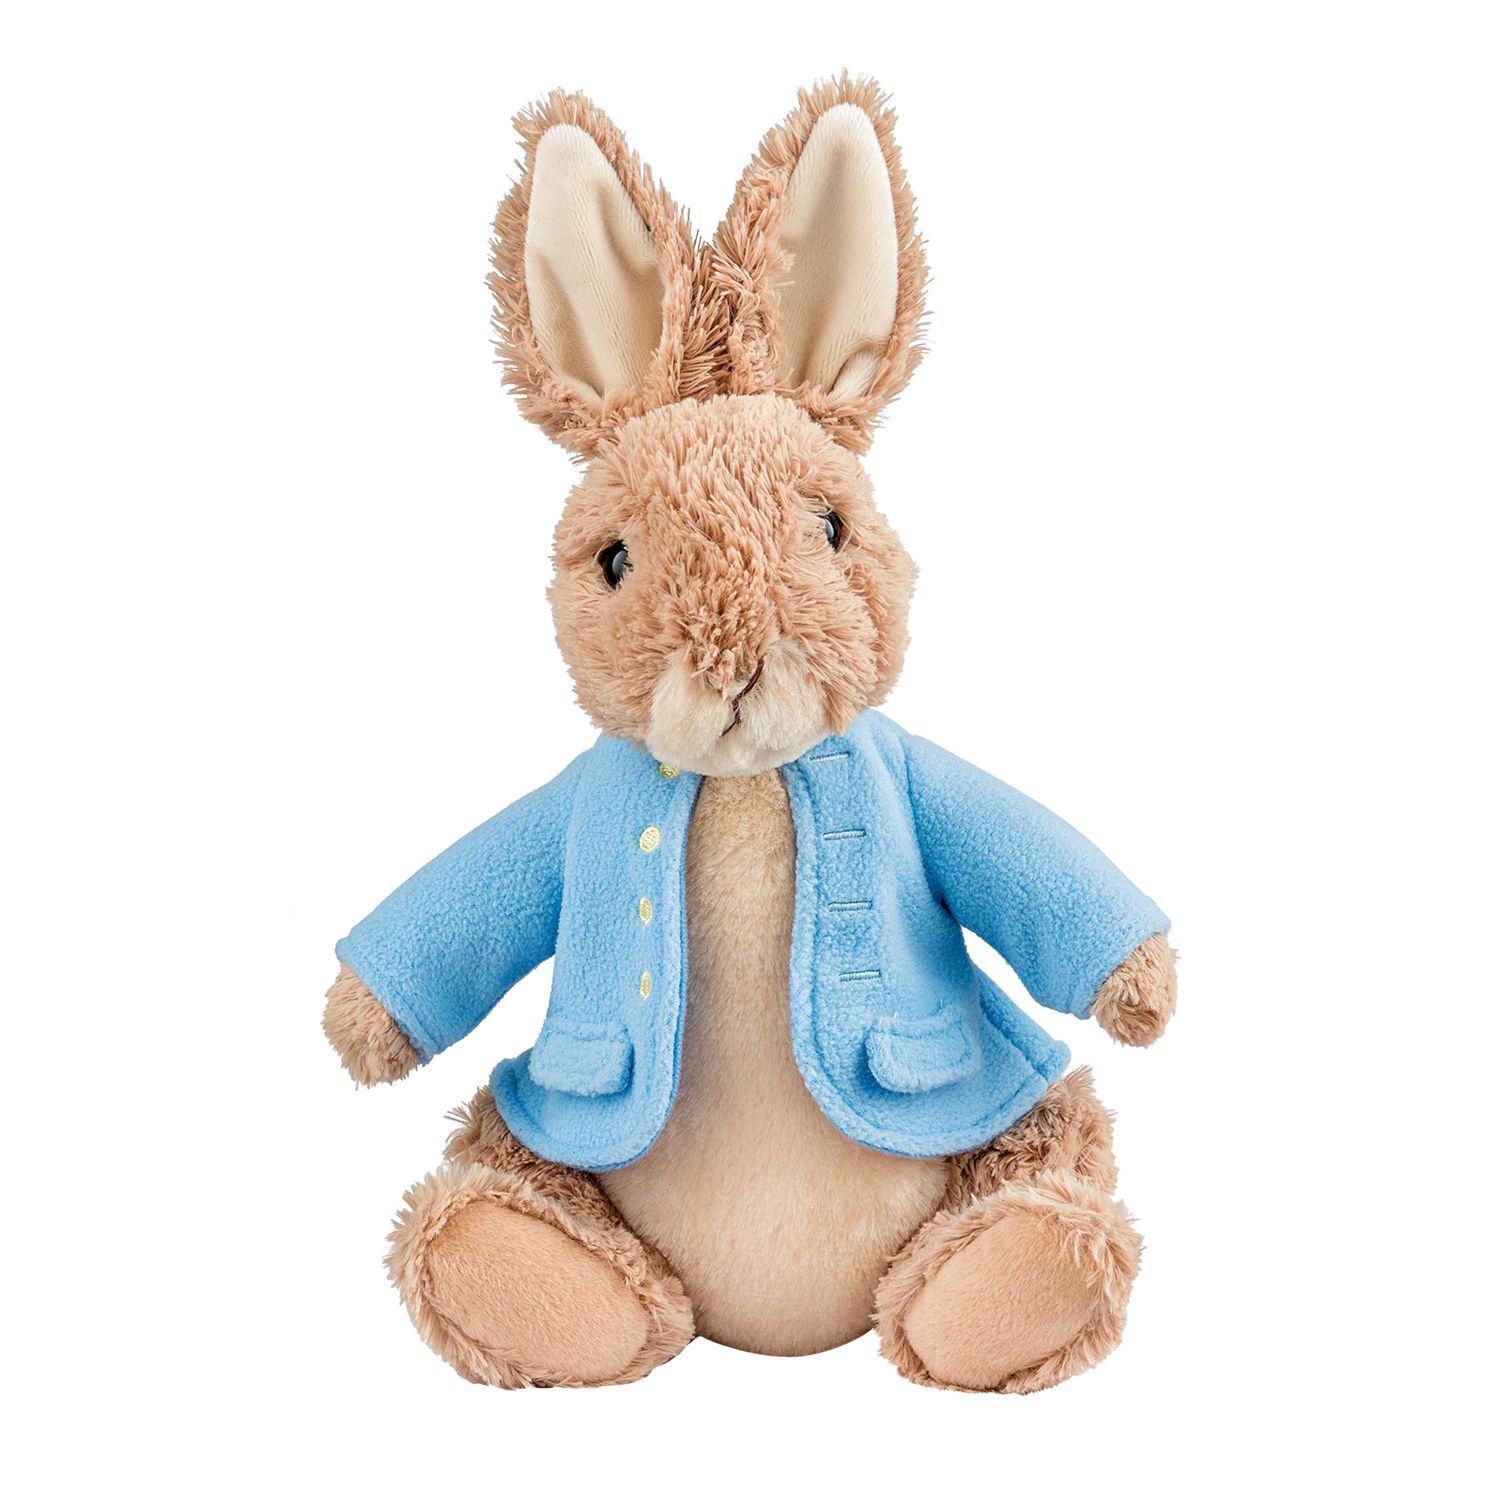 MY FIRST FLOPSY RABBIT 12" PLUSH BRAND NEW GREAT GIFT BEATRIX POTTER PETER